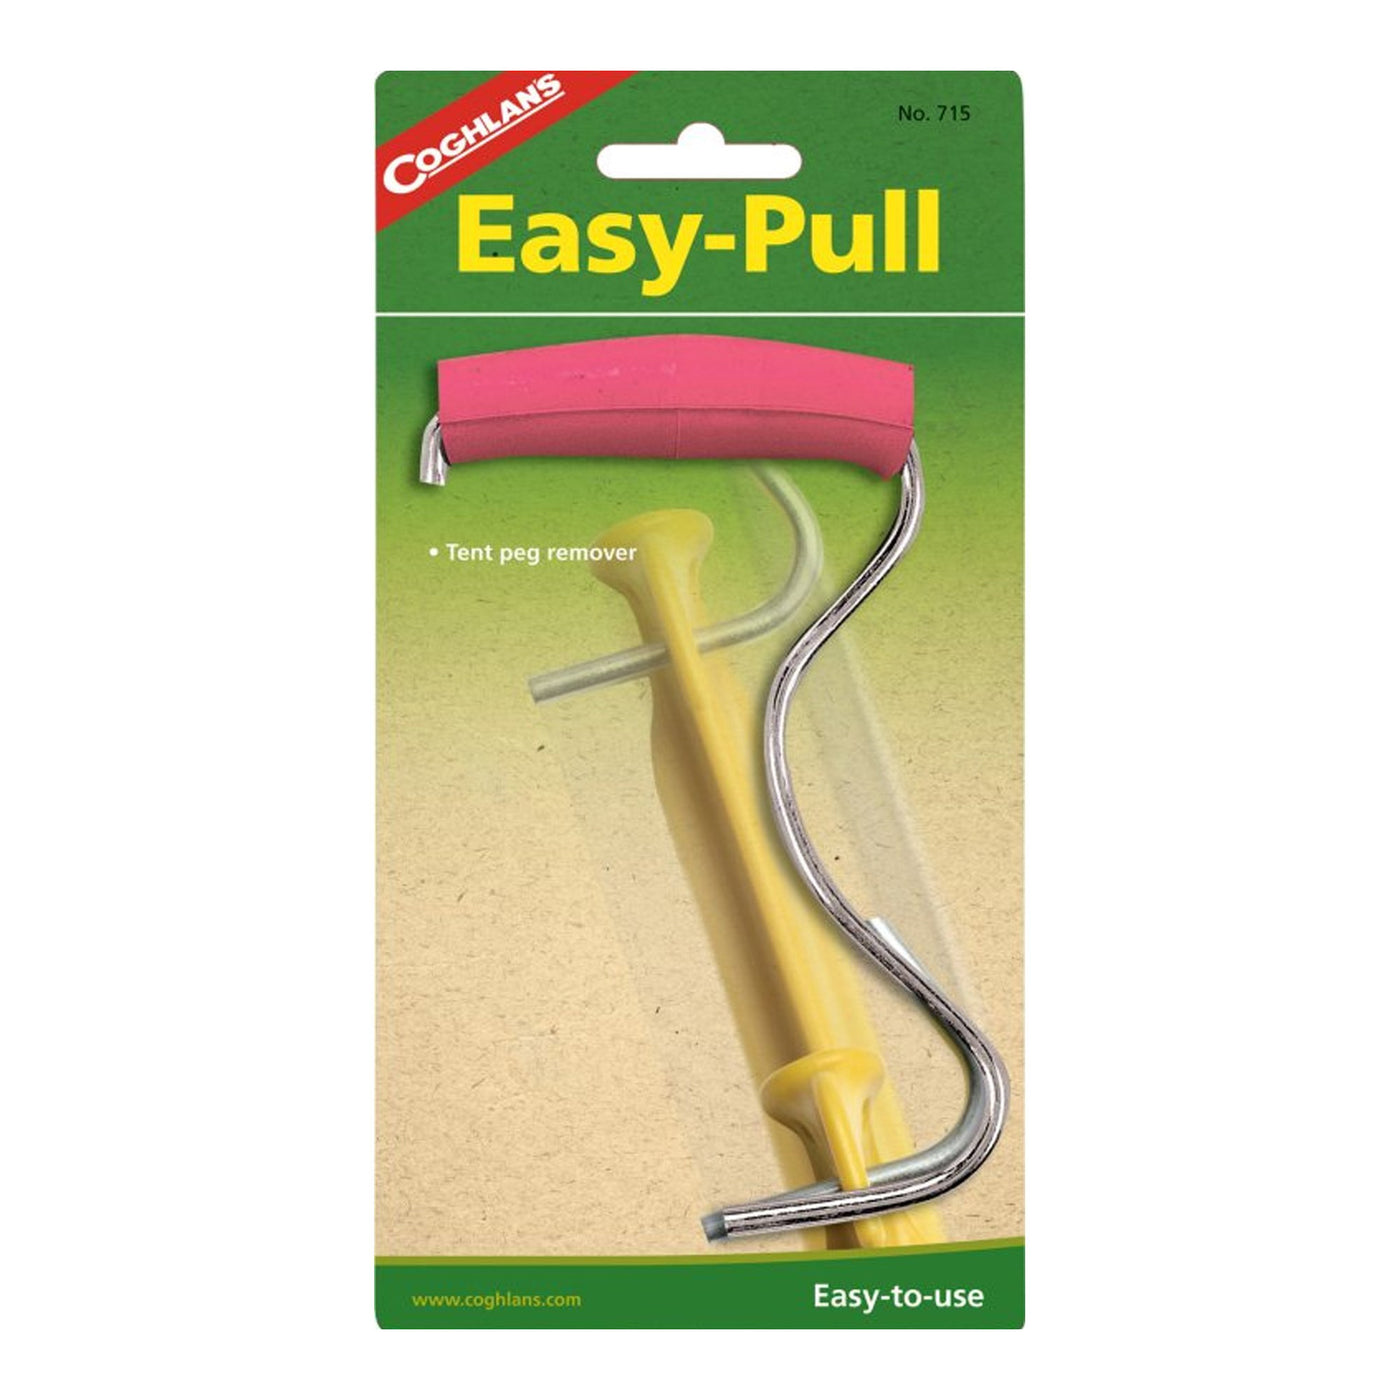 Easy-Pull Tent Peg Remover